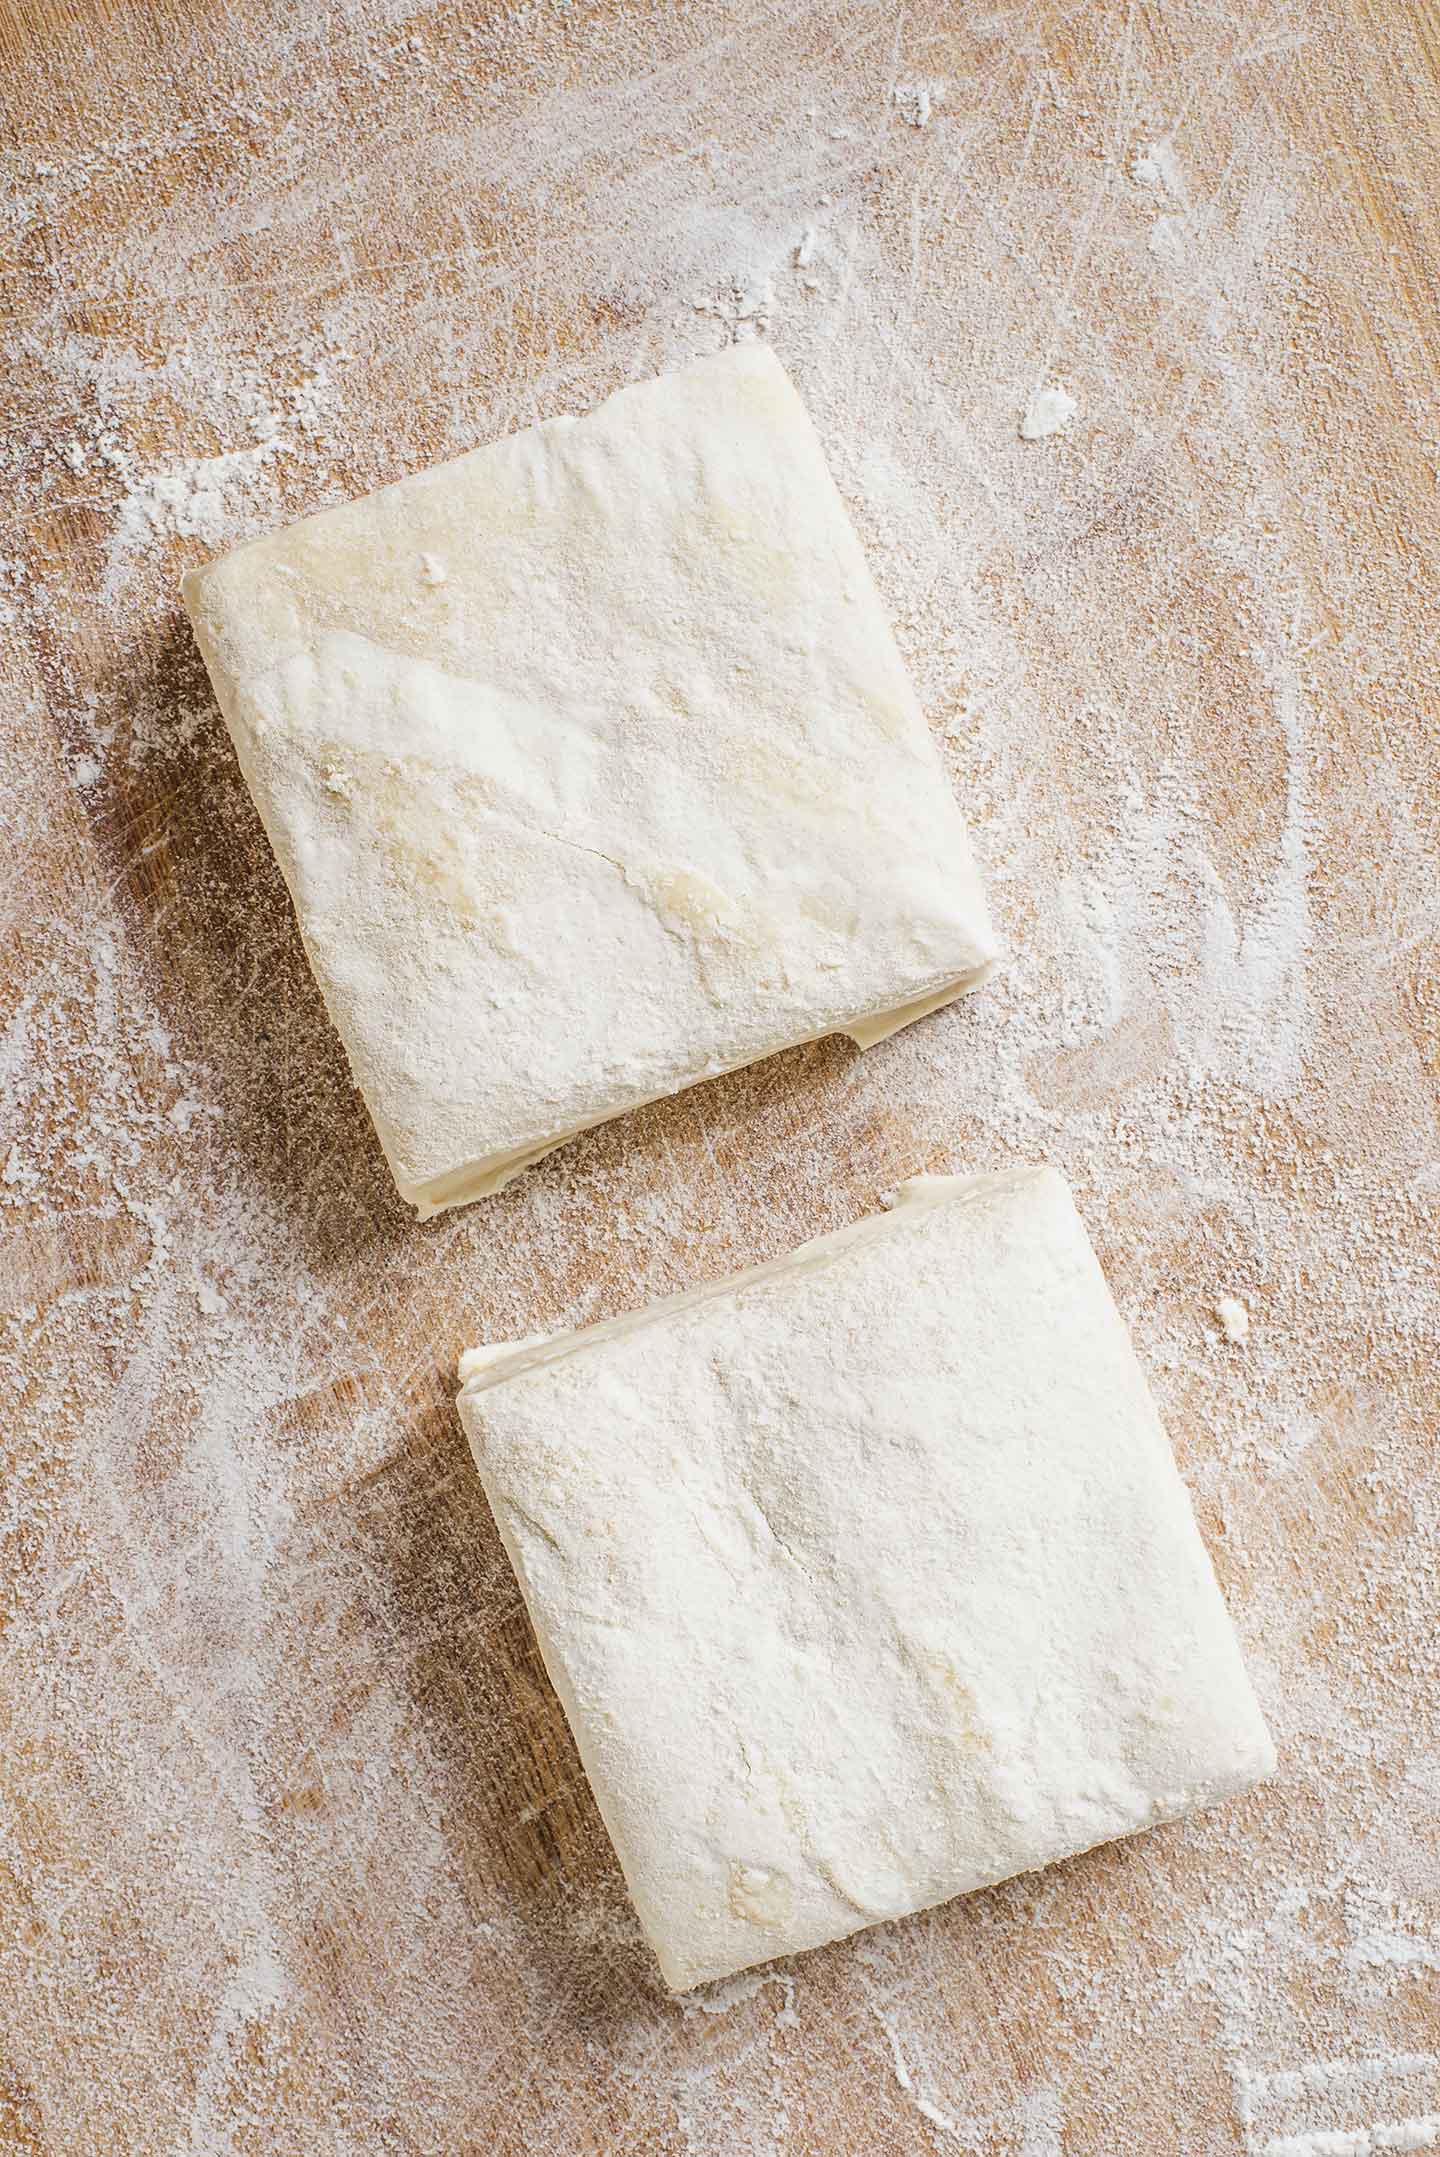 Top down view of two squares of puff pastry on a lightly floured wooden cutting board.